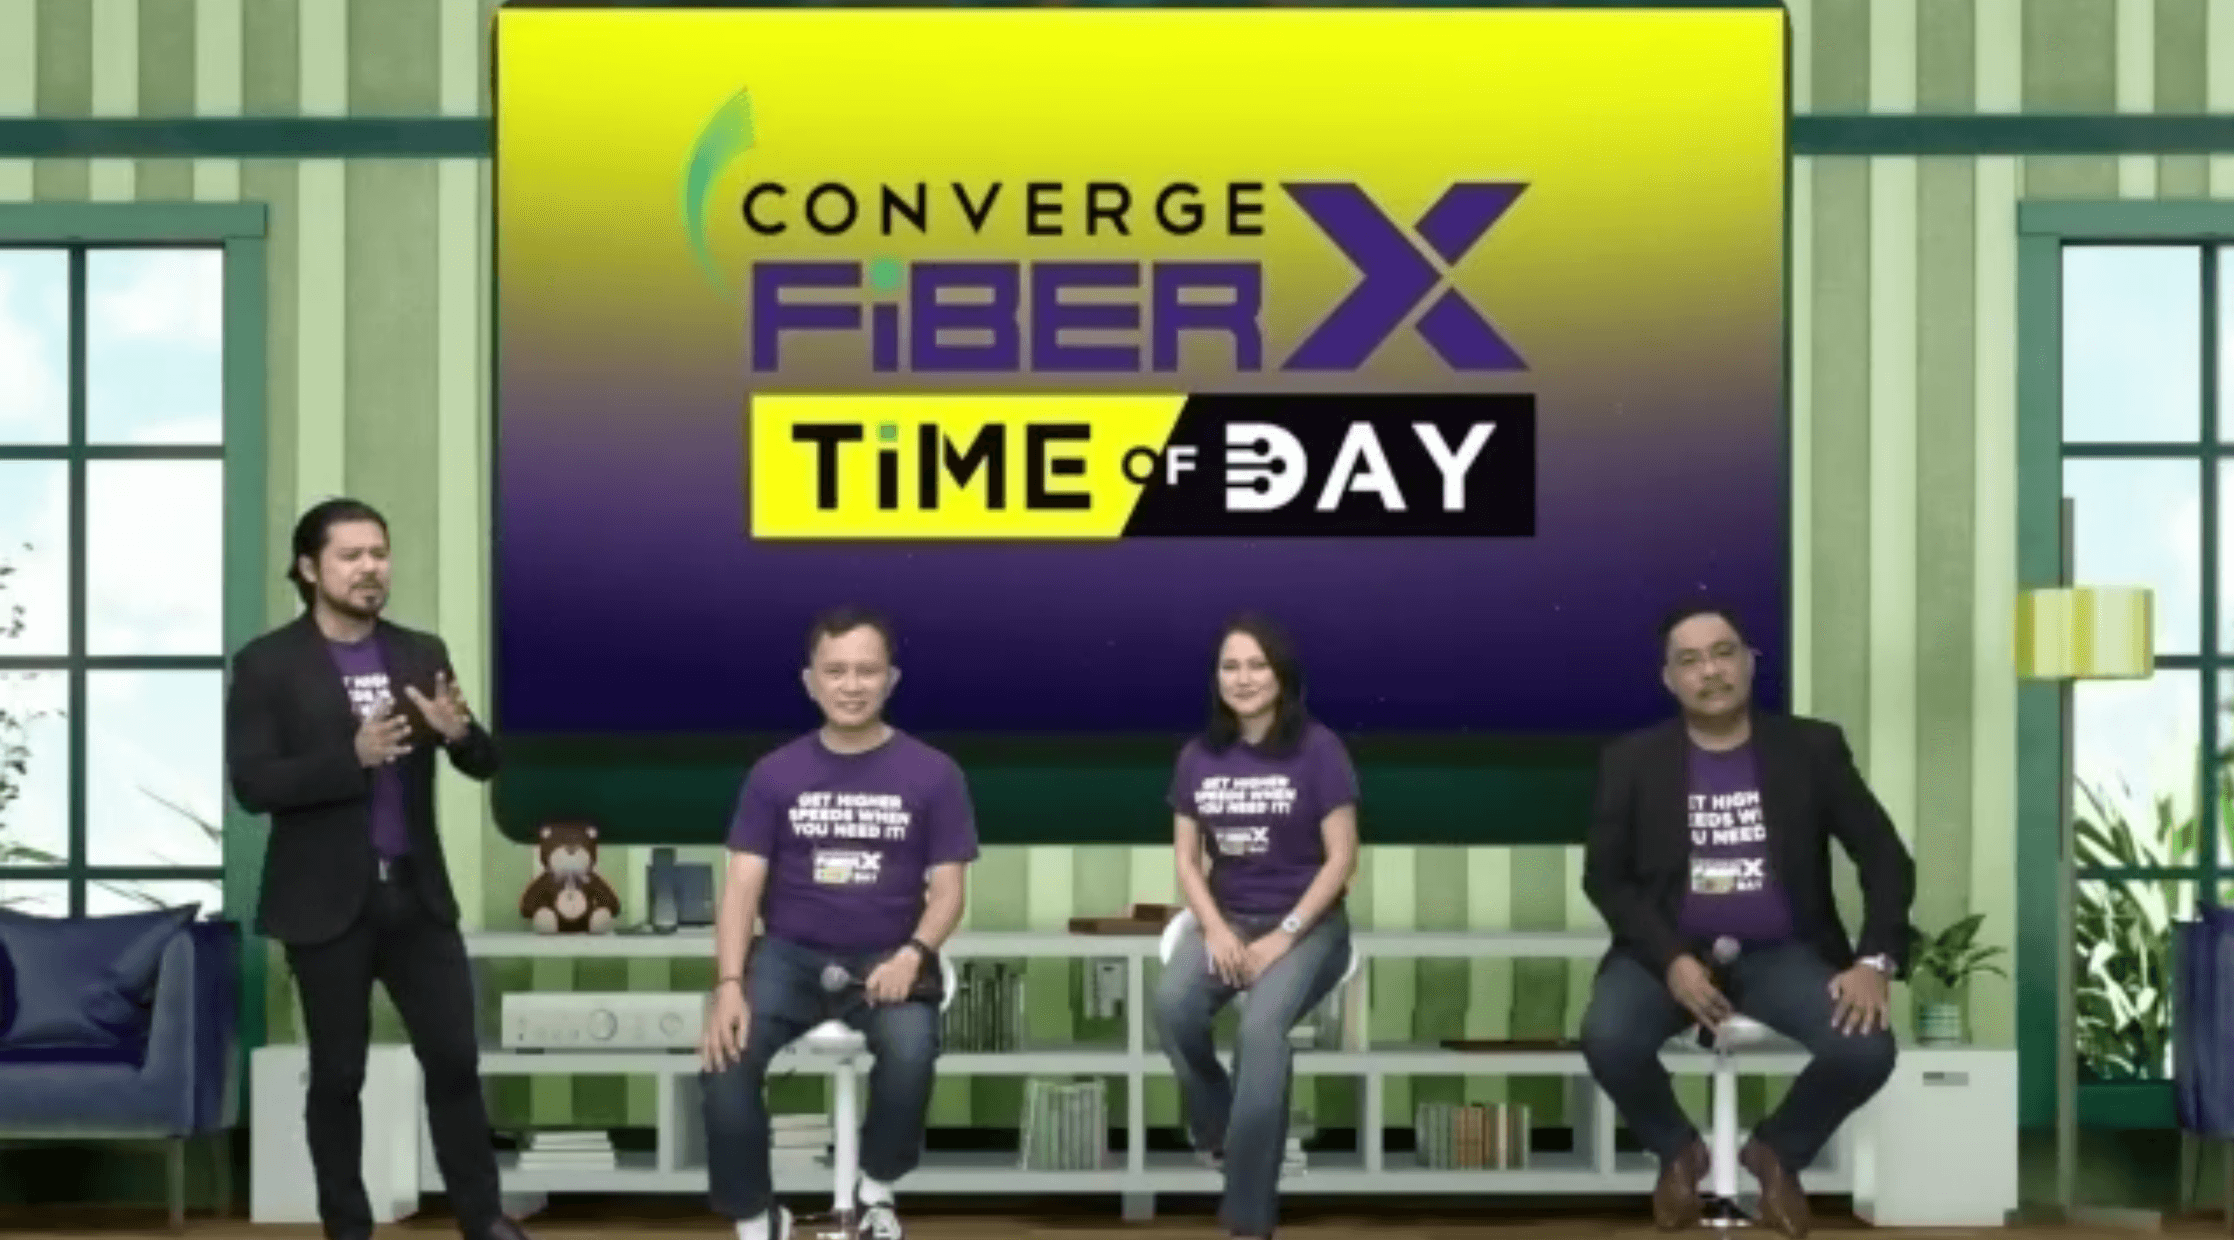 Converge ICT offers new speed boost for residential customers